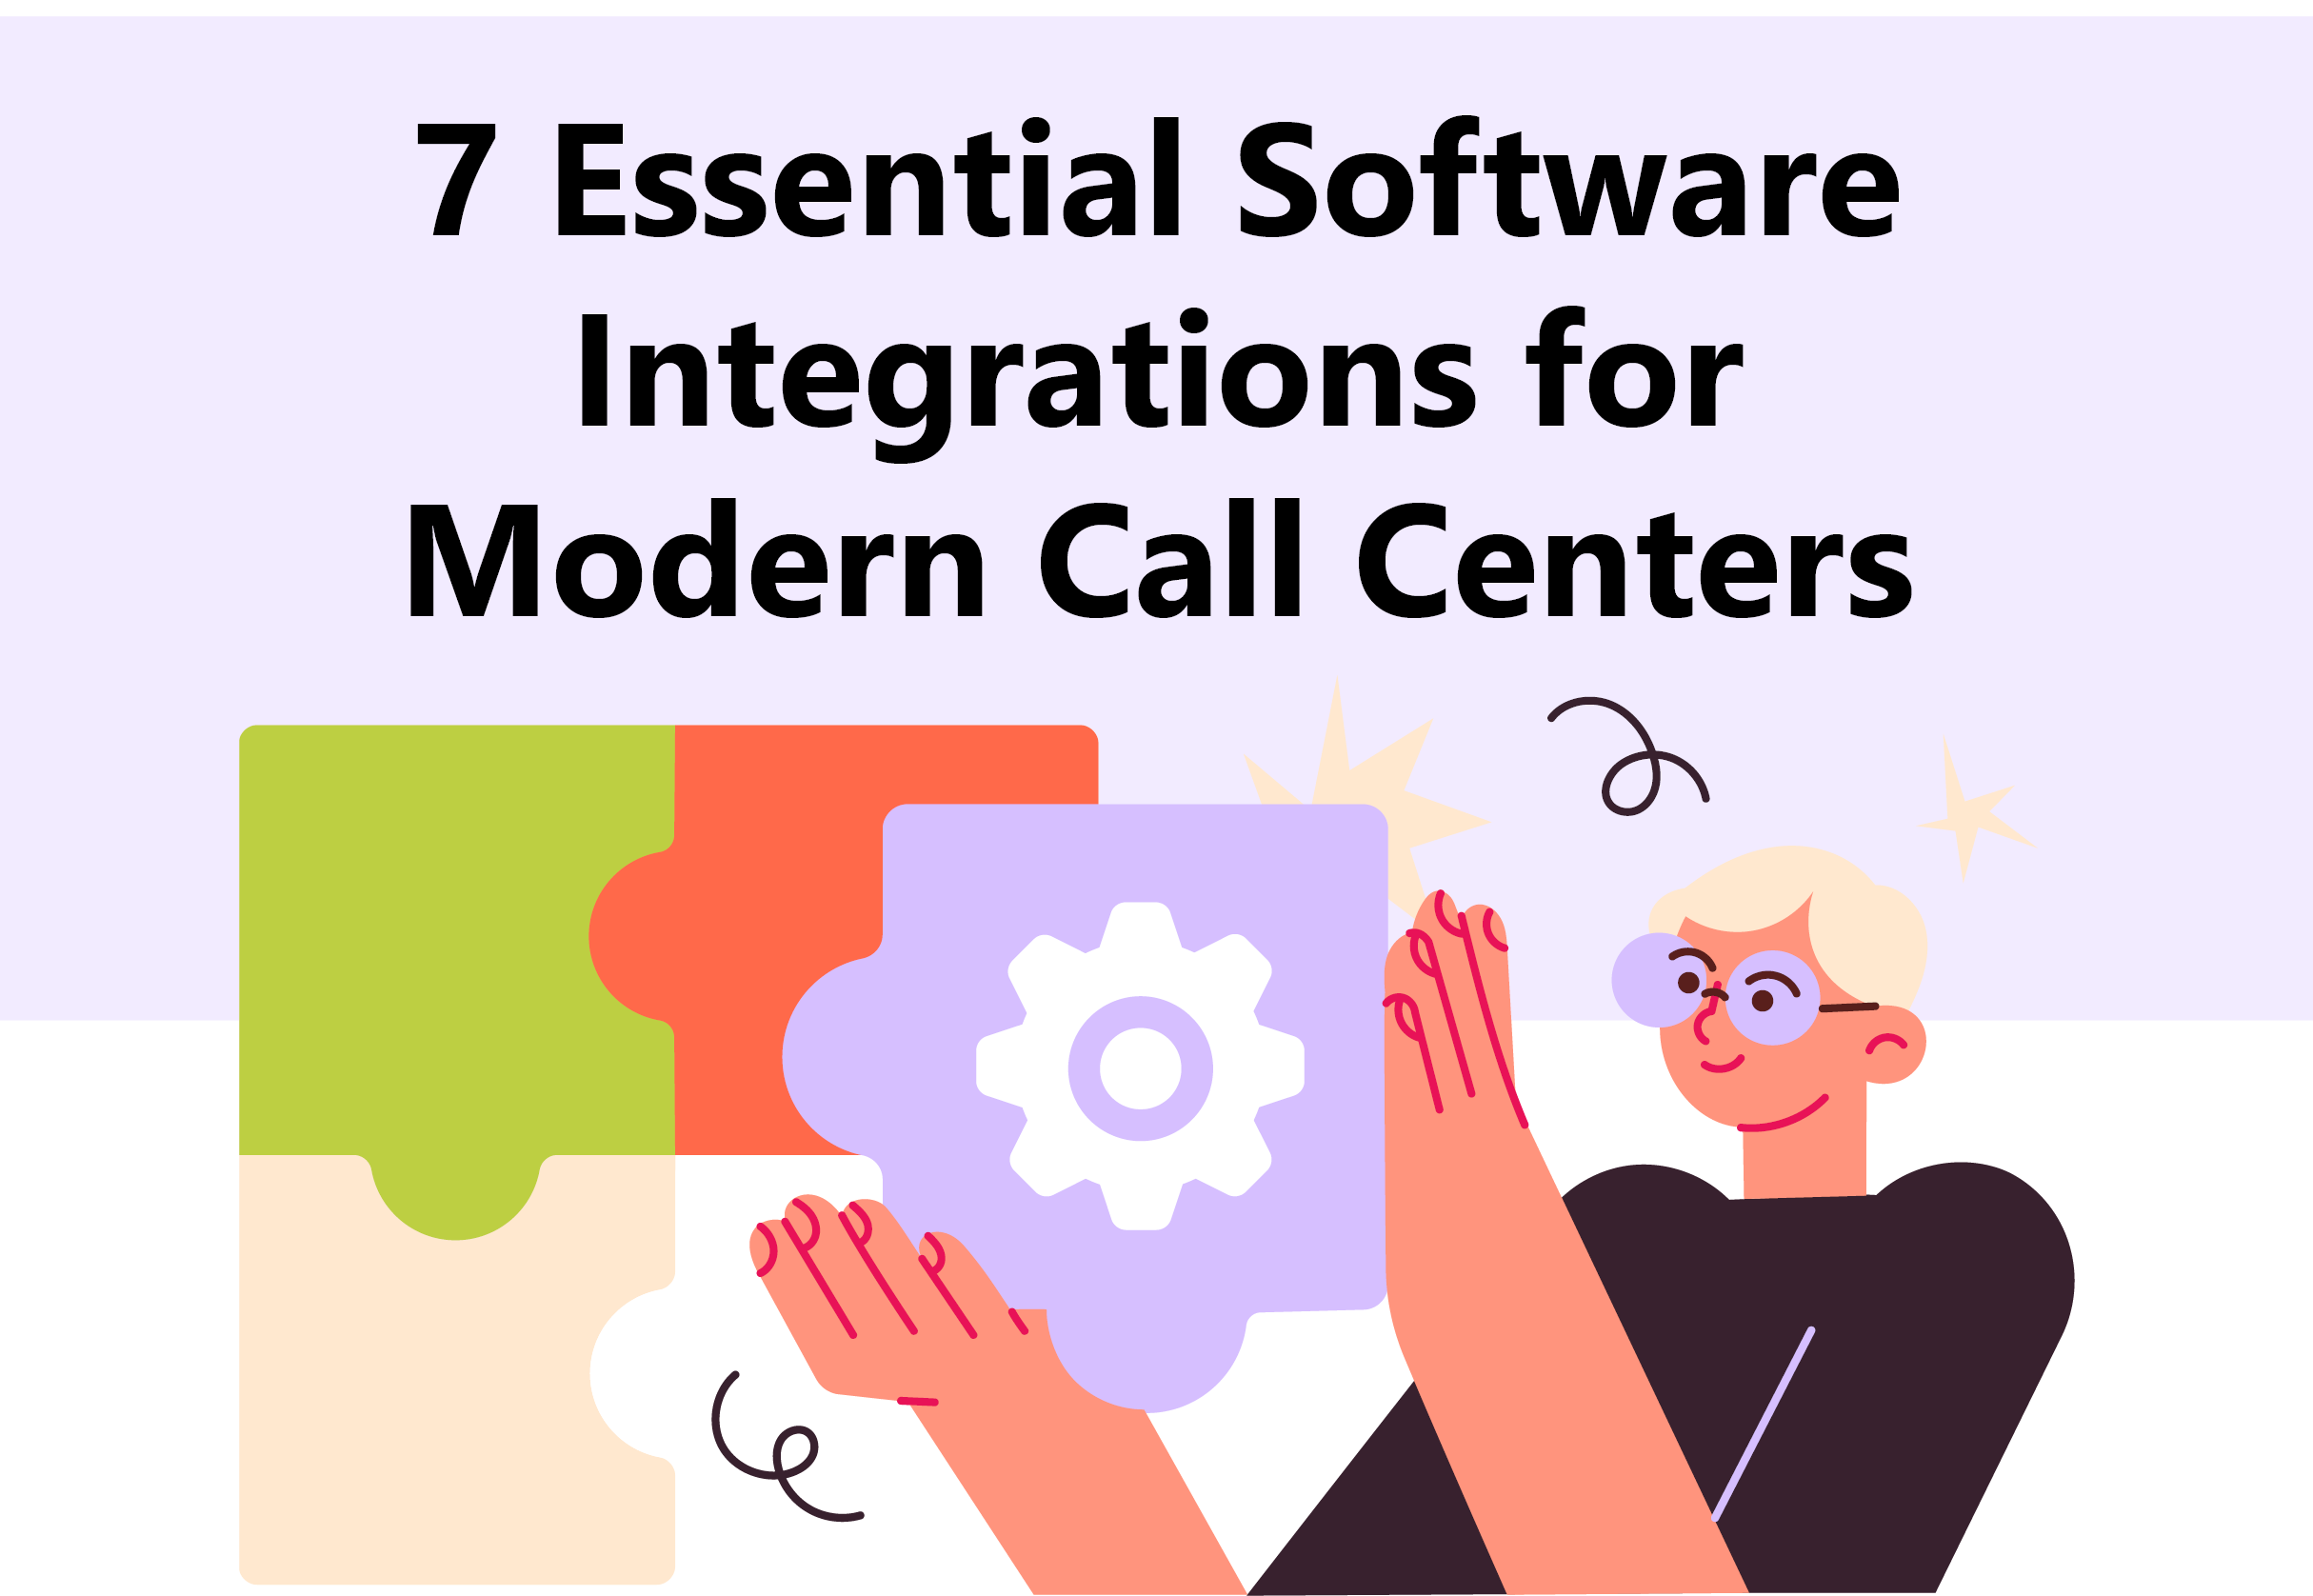 7-essential-software-integrations-for-call-centers